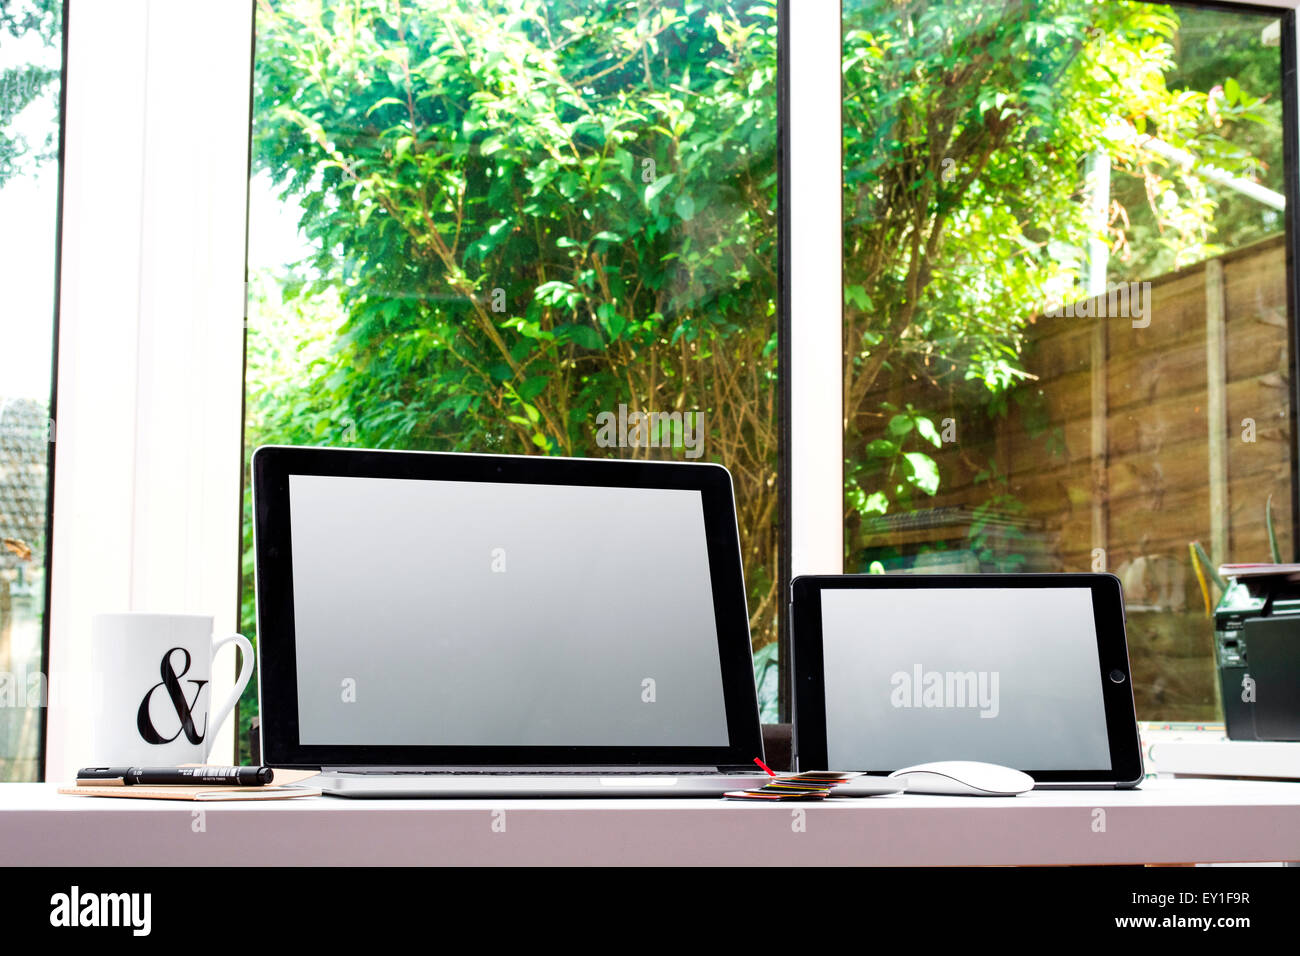 Creative Home Office space with graphic designers desk with laptop lookin gout a window Stock Photo